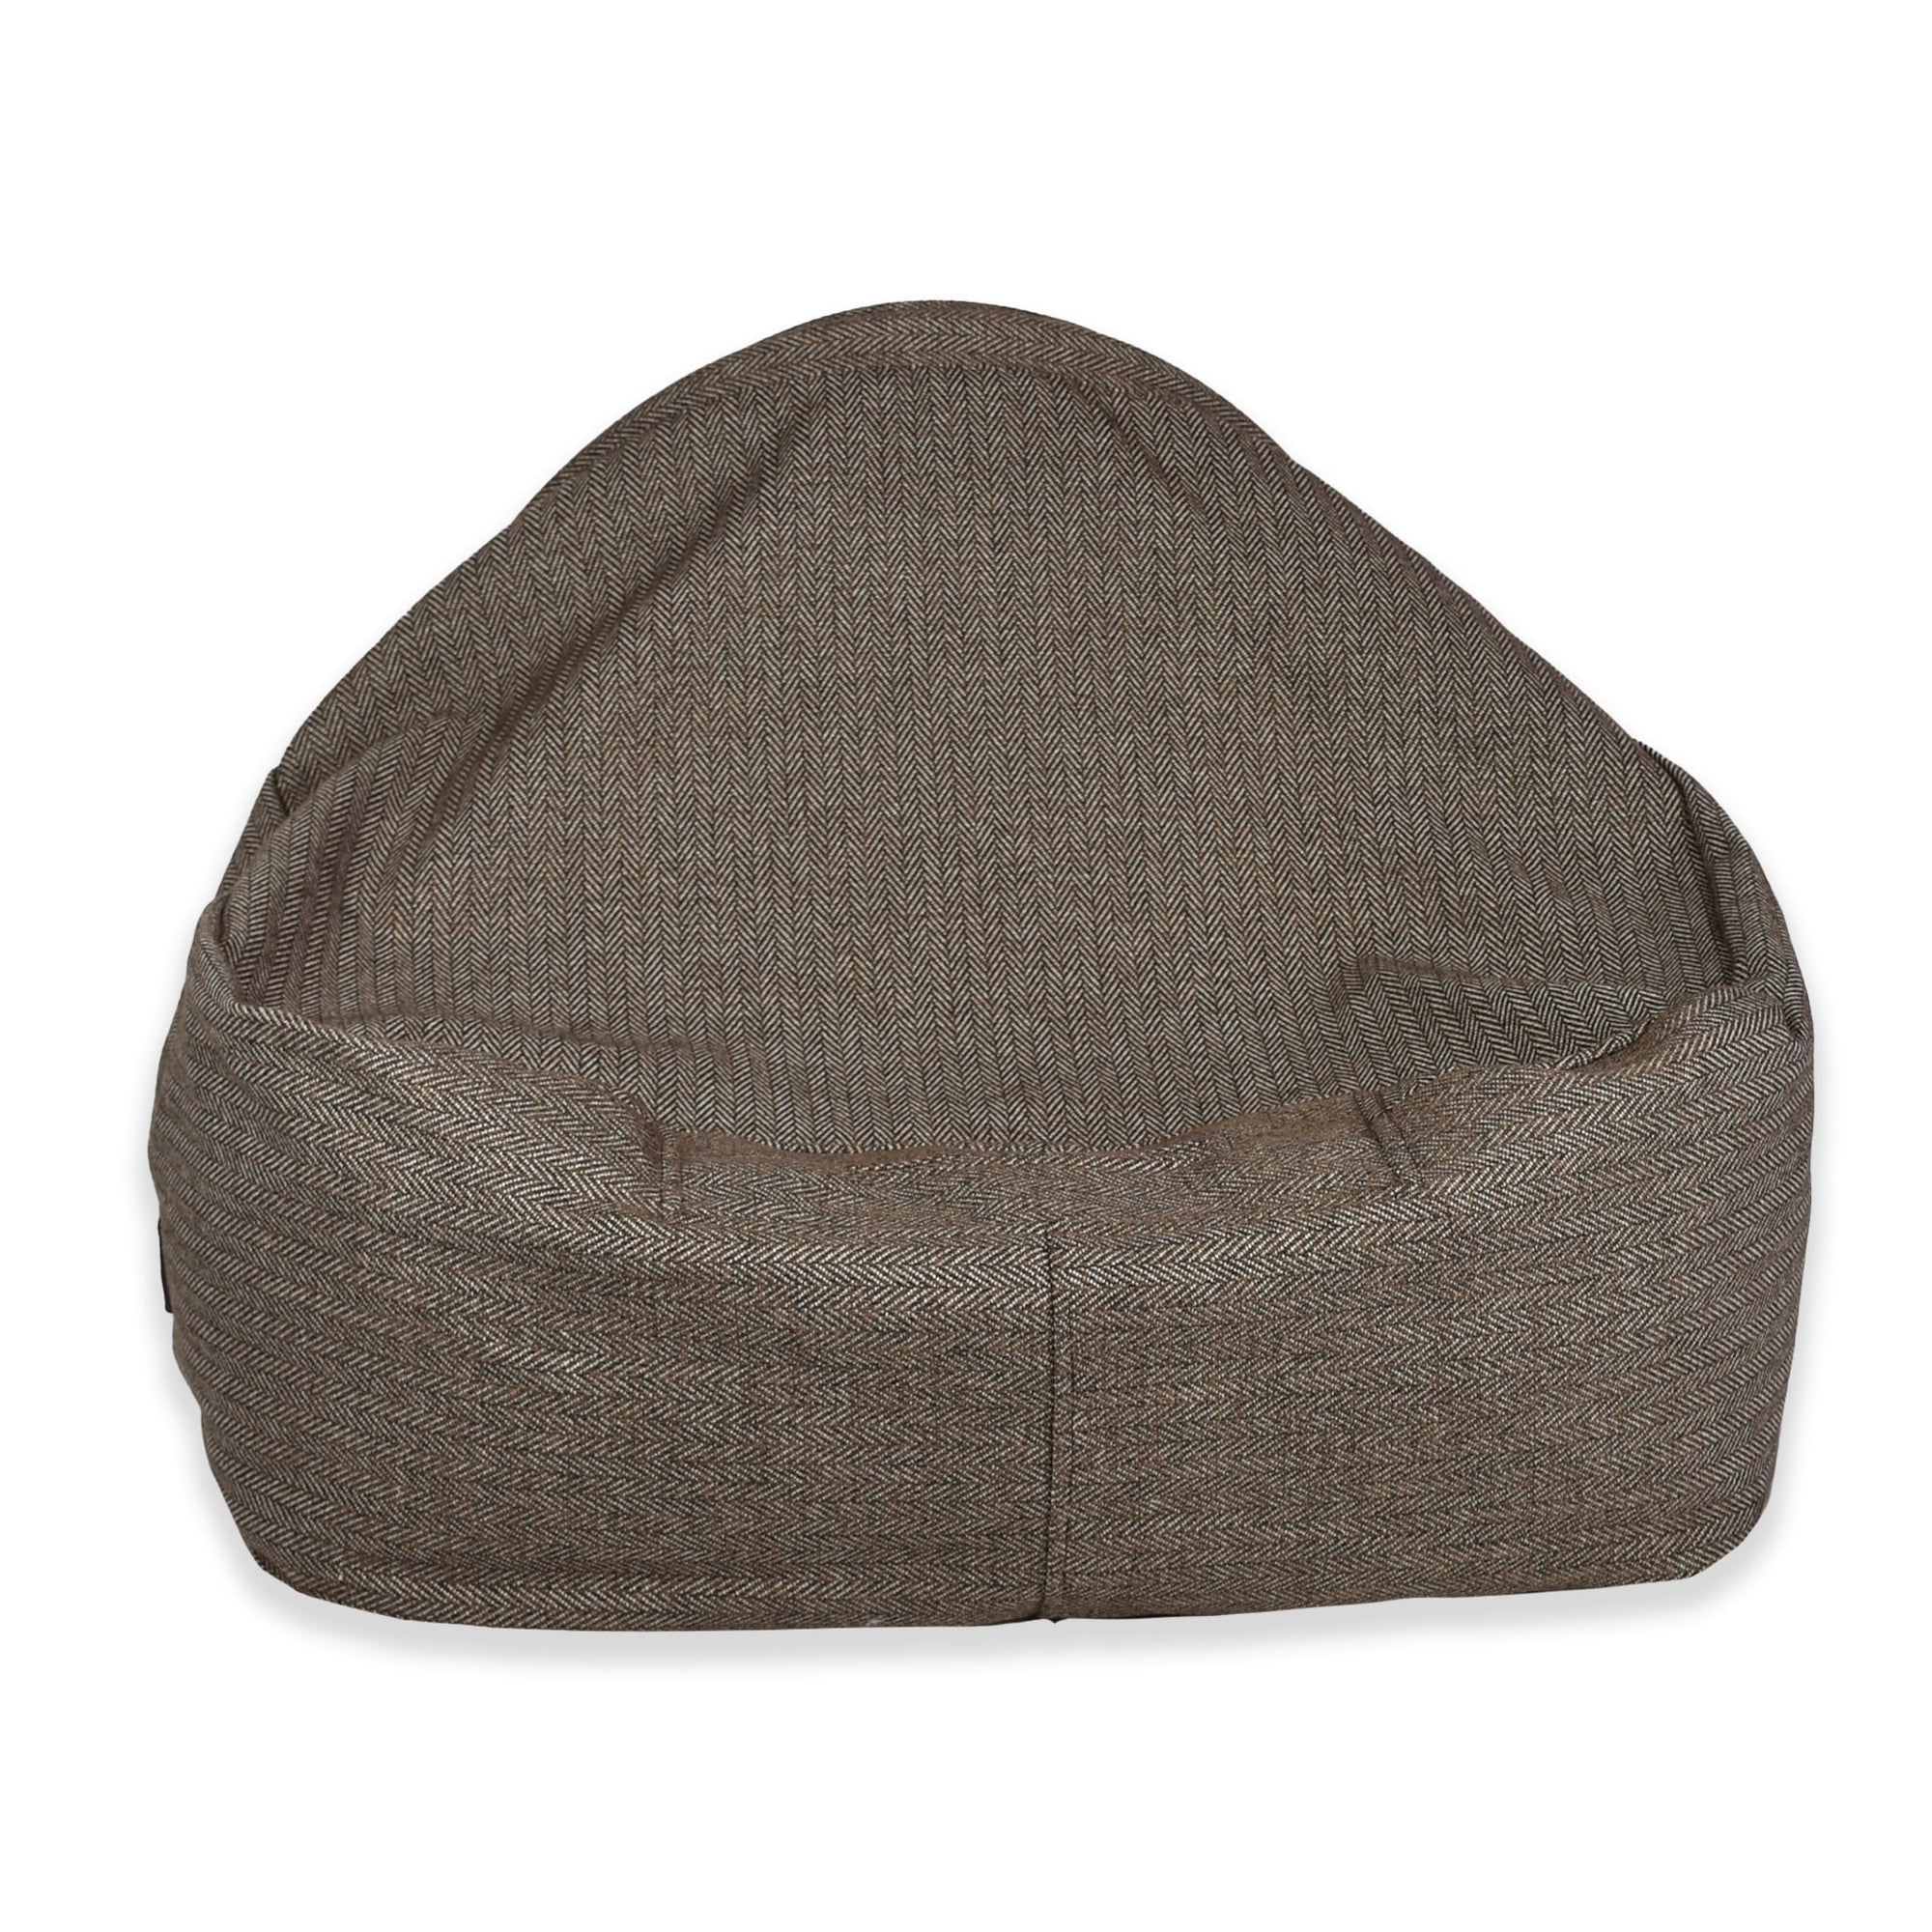 KONA CAVE® dog bed for dogs that sleep under the blankets. Warm dog bed in brown herringbone. 